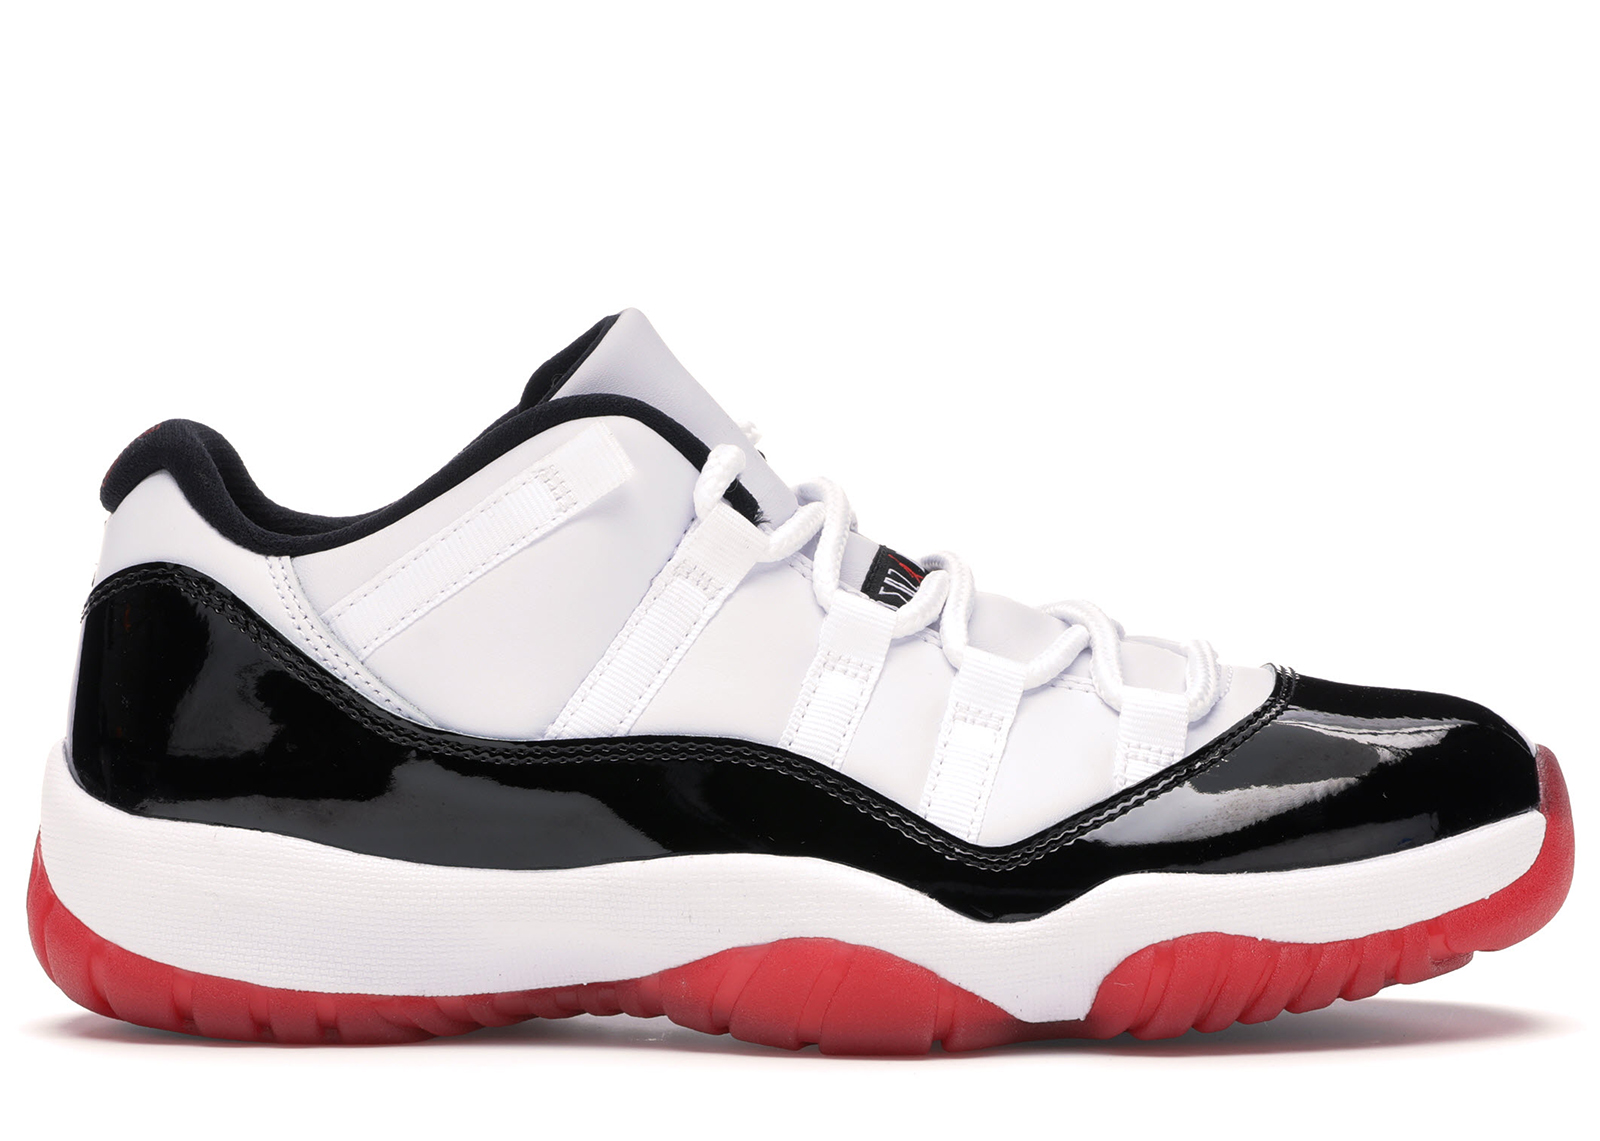 retro 11 low red and white